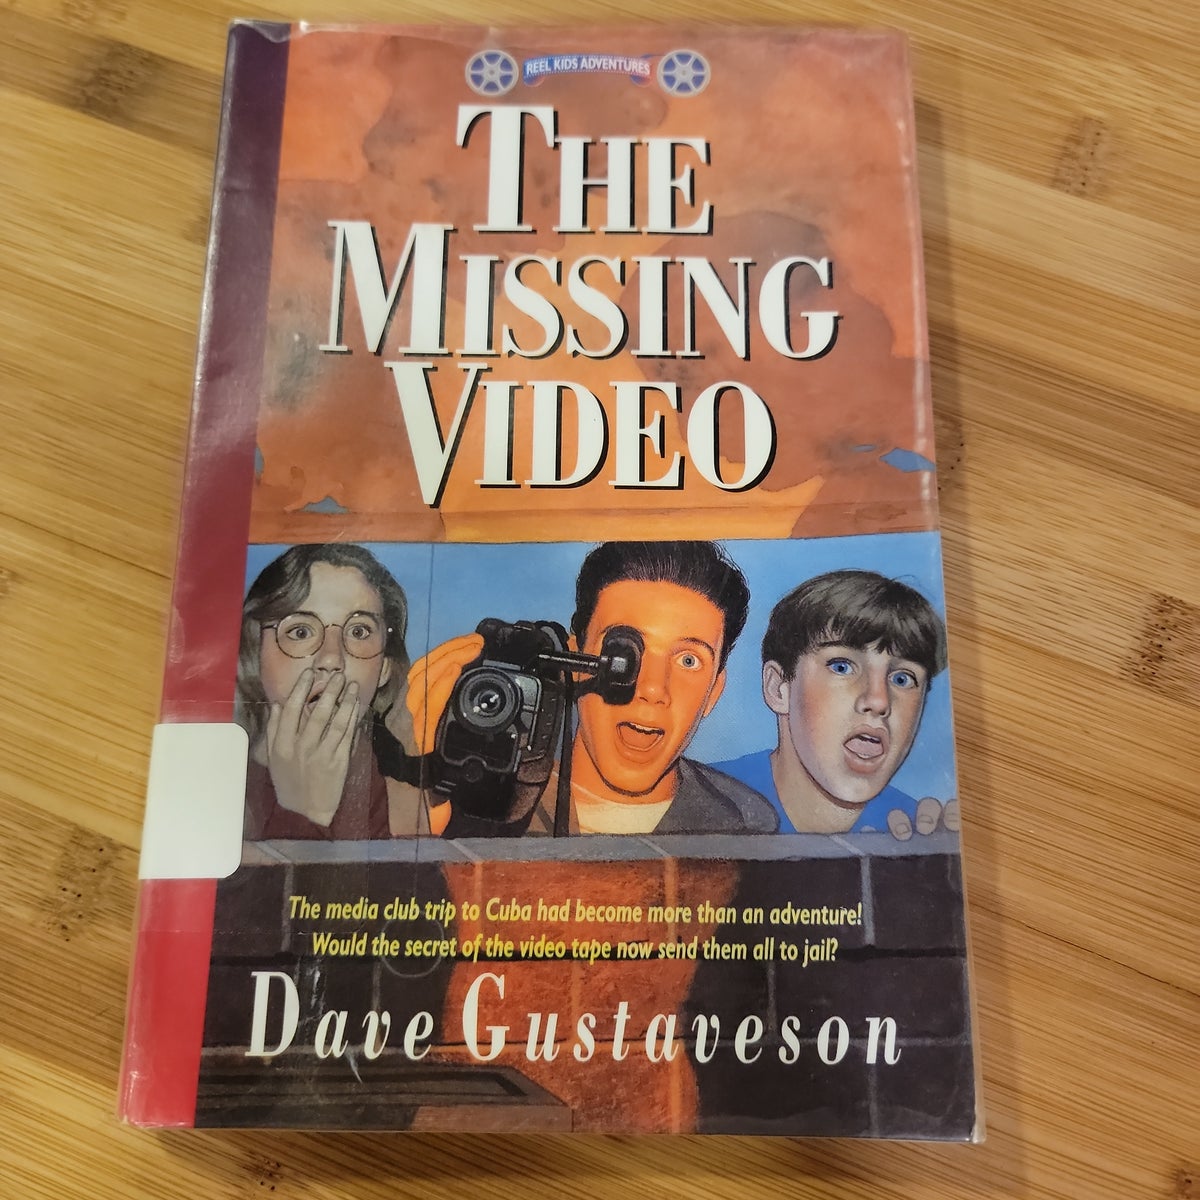 Reel Kids Adventures - the Missing Video by Dave Gustaveson